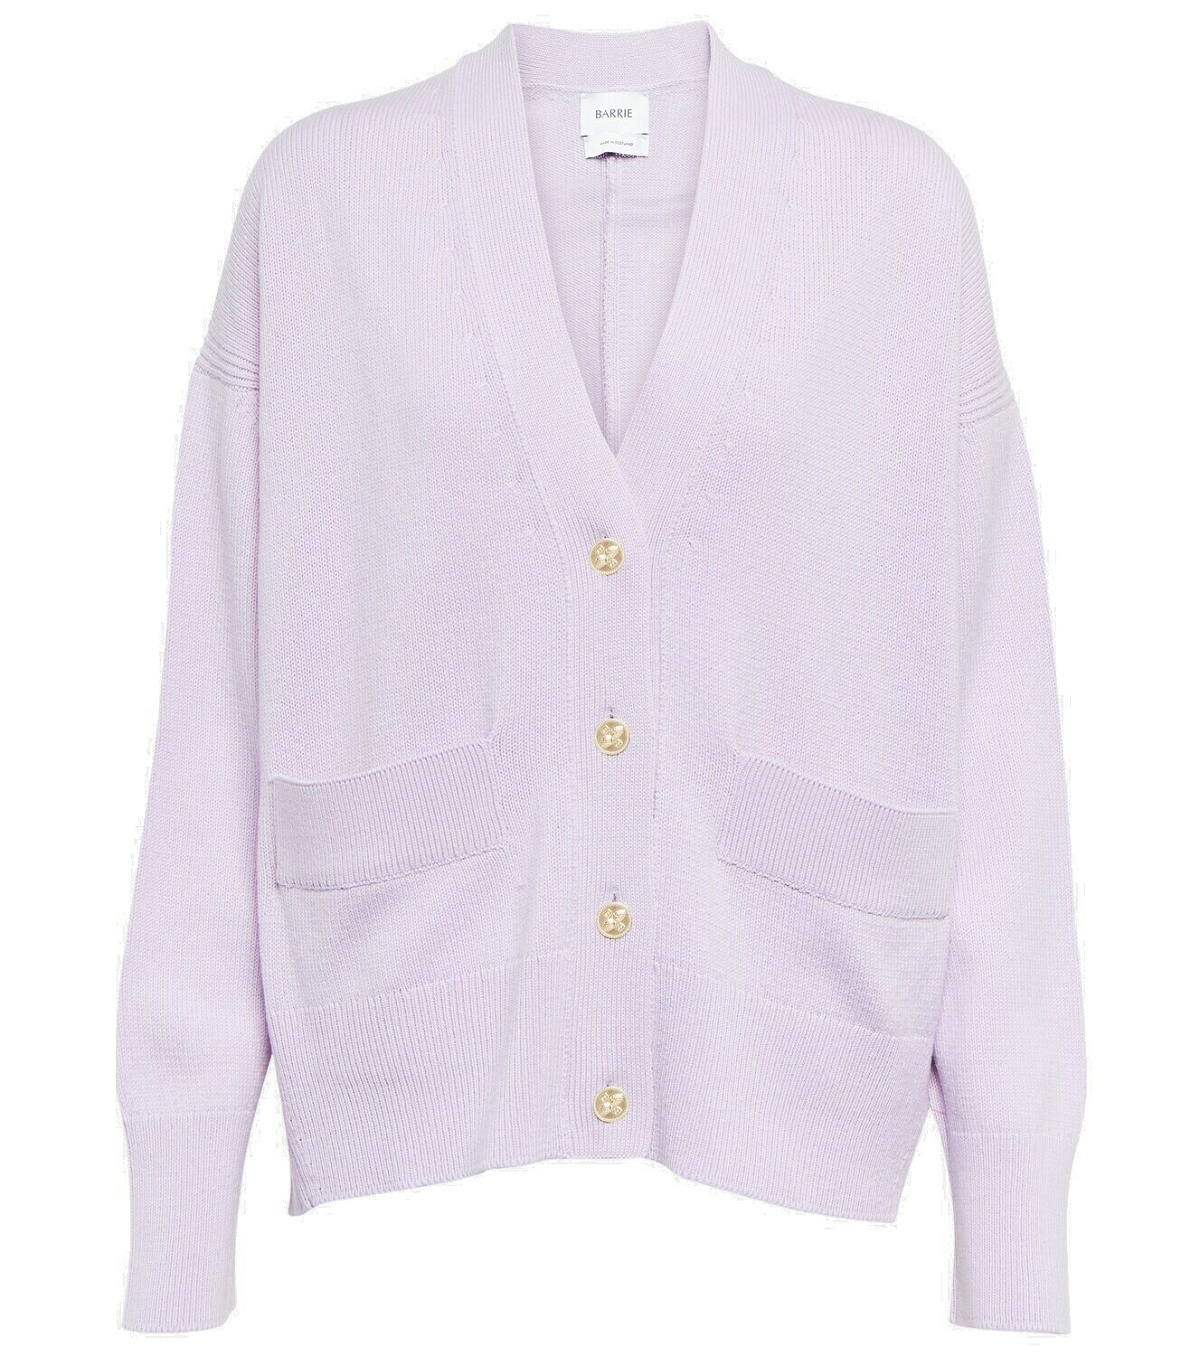 Photo: Barrie Cashmere cardigan